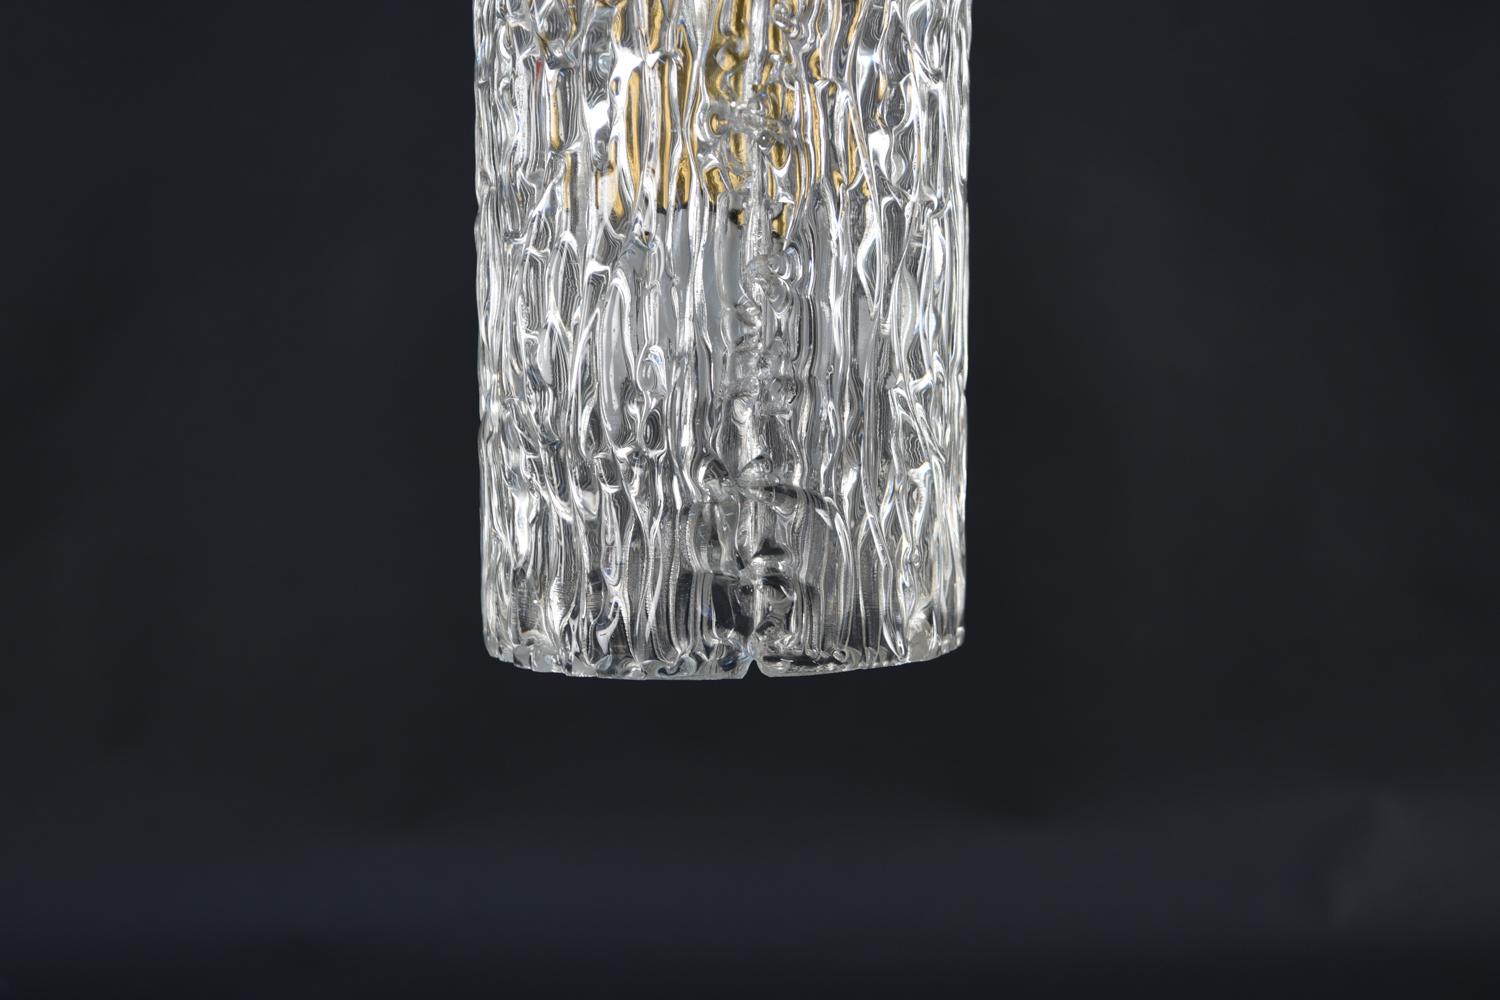 This midcentury petite textured glass pendant light was designed by the esteemed lighting designer Carl Fagerlund, who frequently worked with Swedish maker Orrefors. This piece is a beautiful way to brighten up a room. This pendant has been rewired